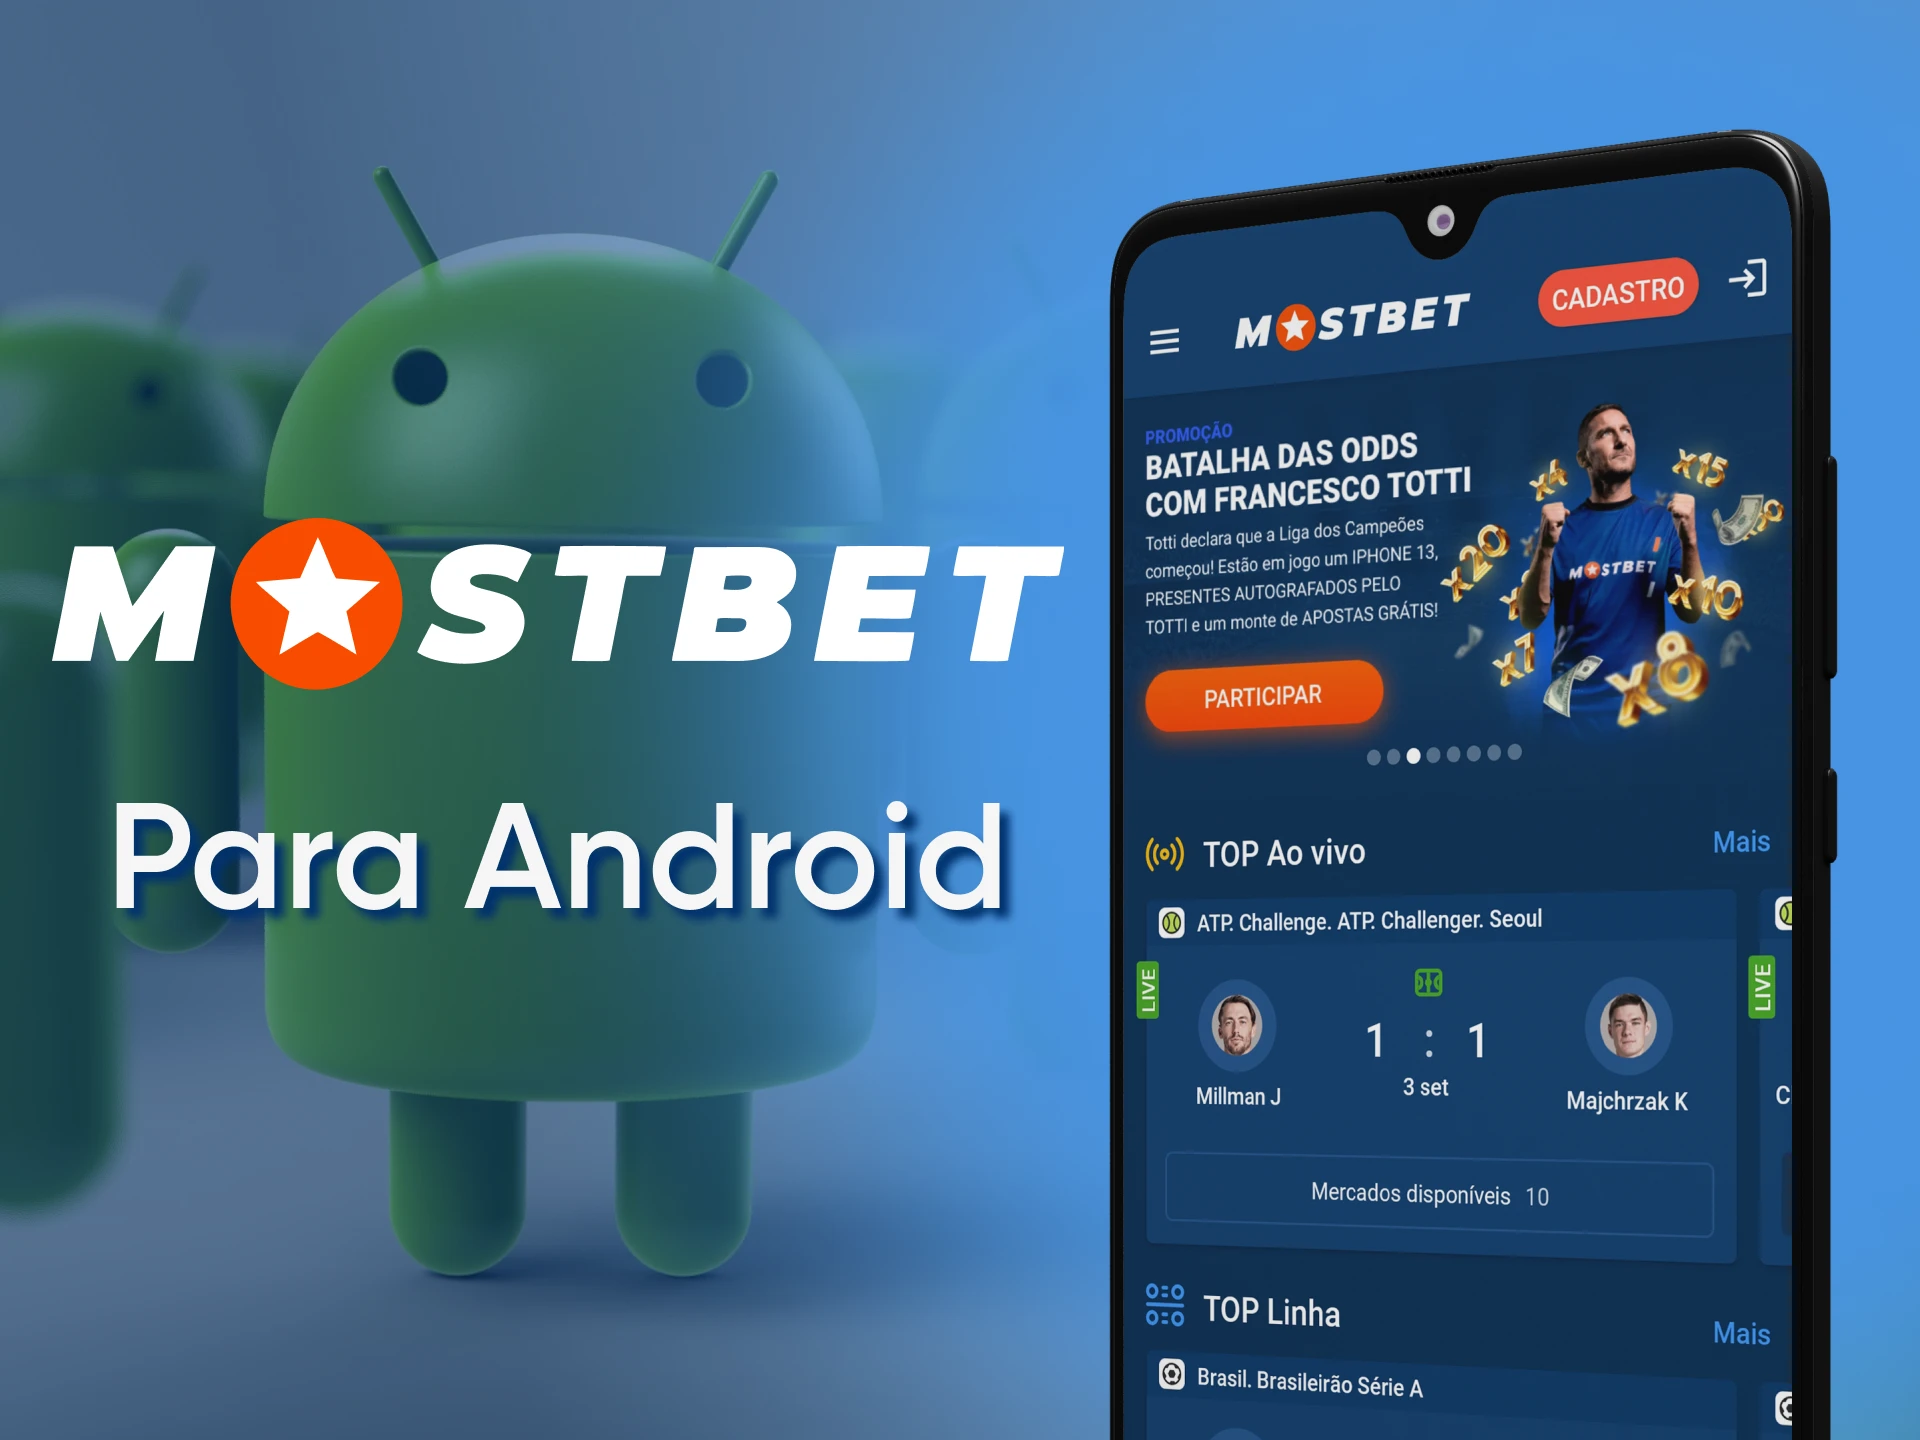 The Best 10 Examples Of Mostbet-AZ91 bookmaker and casino in Azerbaijan